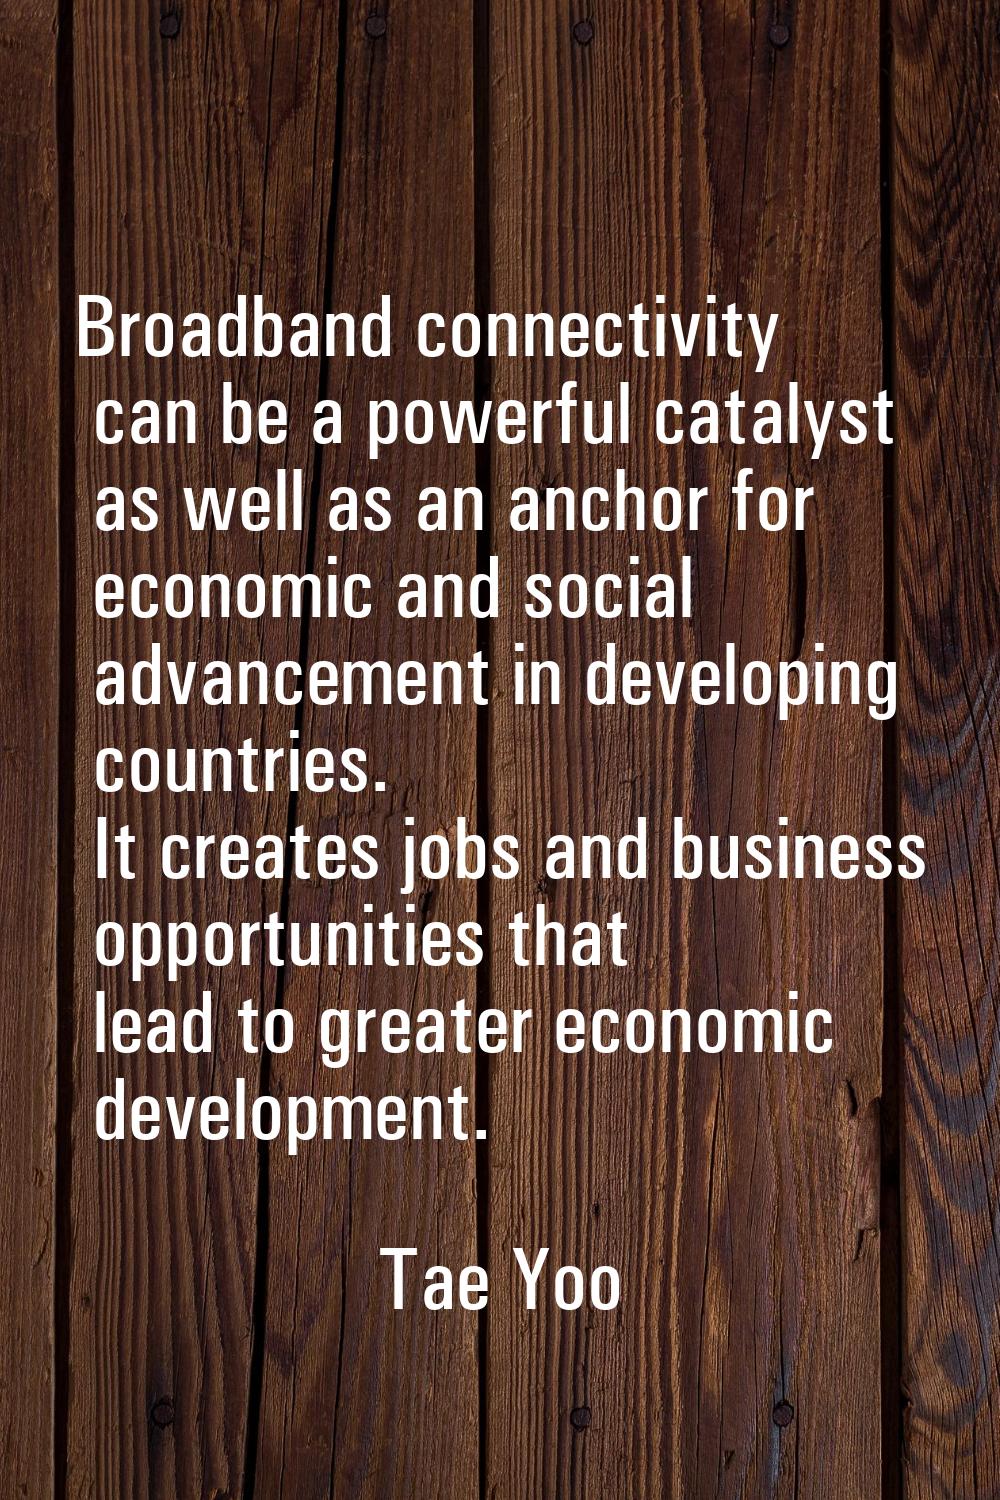 Broadband connectivity can be a powerful catalyst as well as an anchor for economic and social adva